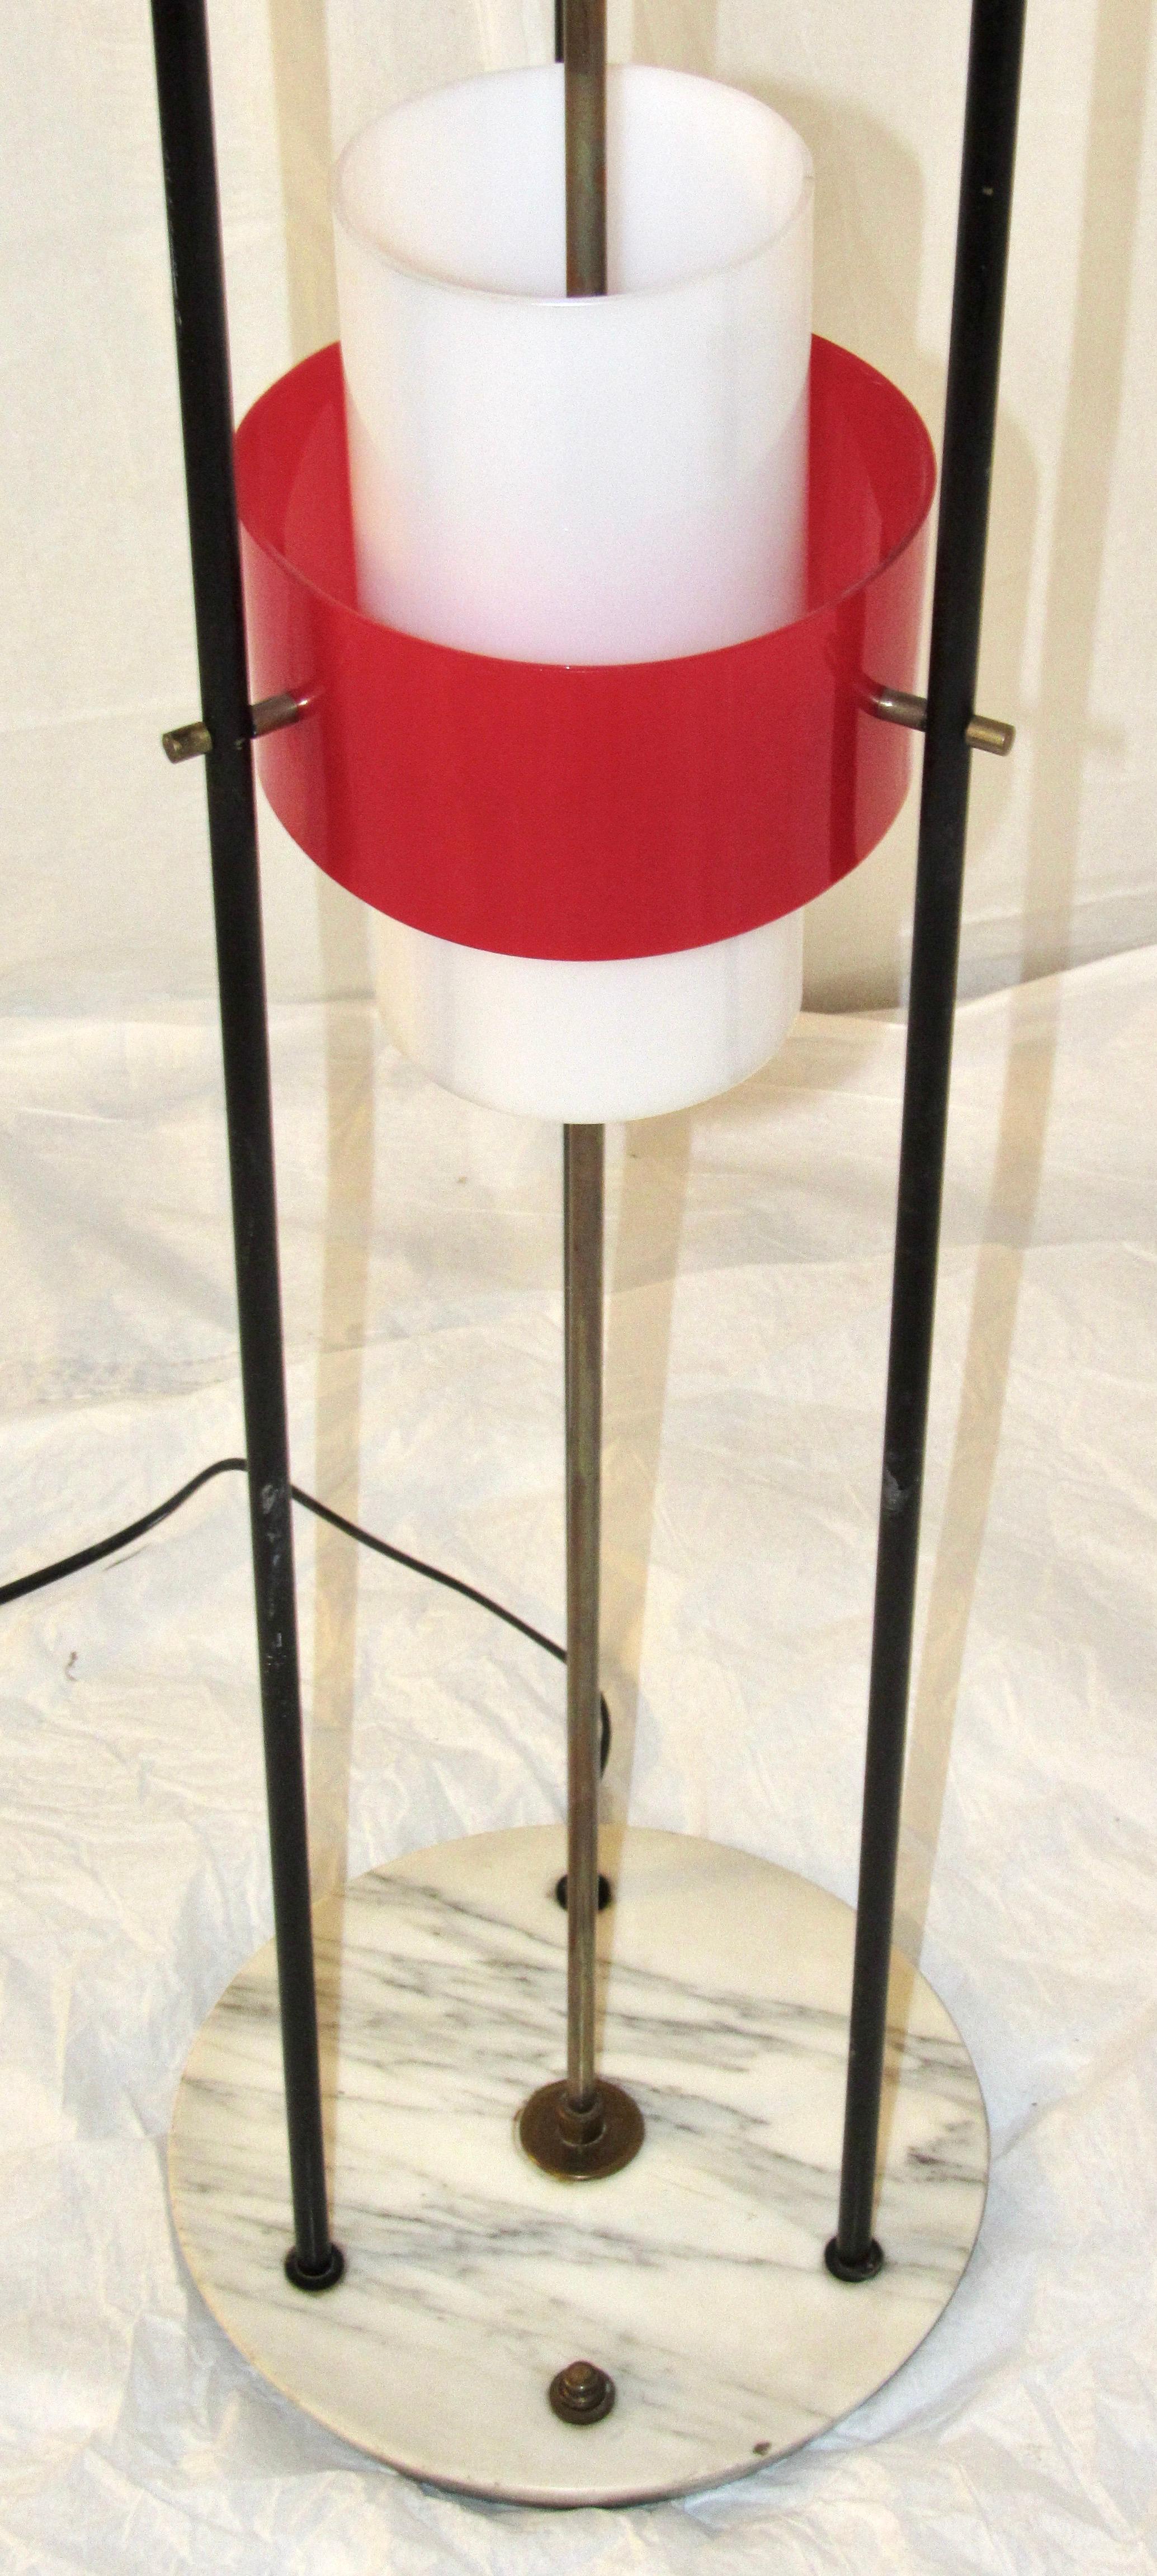 Stilnovo Floor Lamp Red and White Acrylic / Plexi and Marble, Italy, 1960 In Good Condition For Sale In Camden, ME